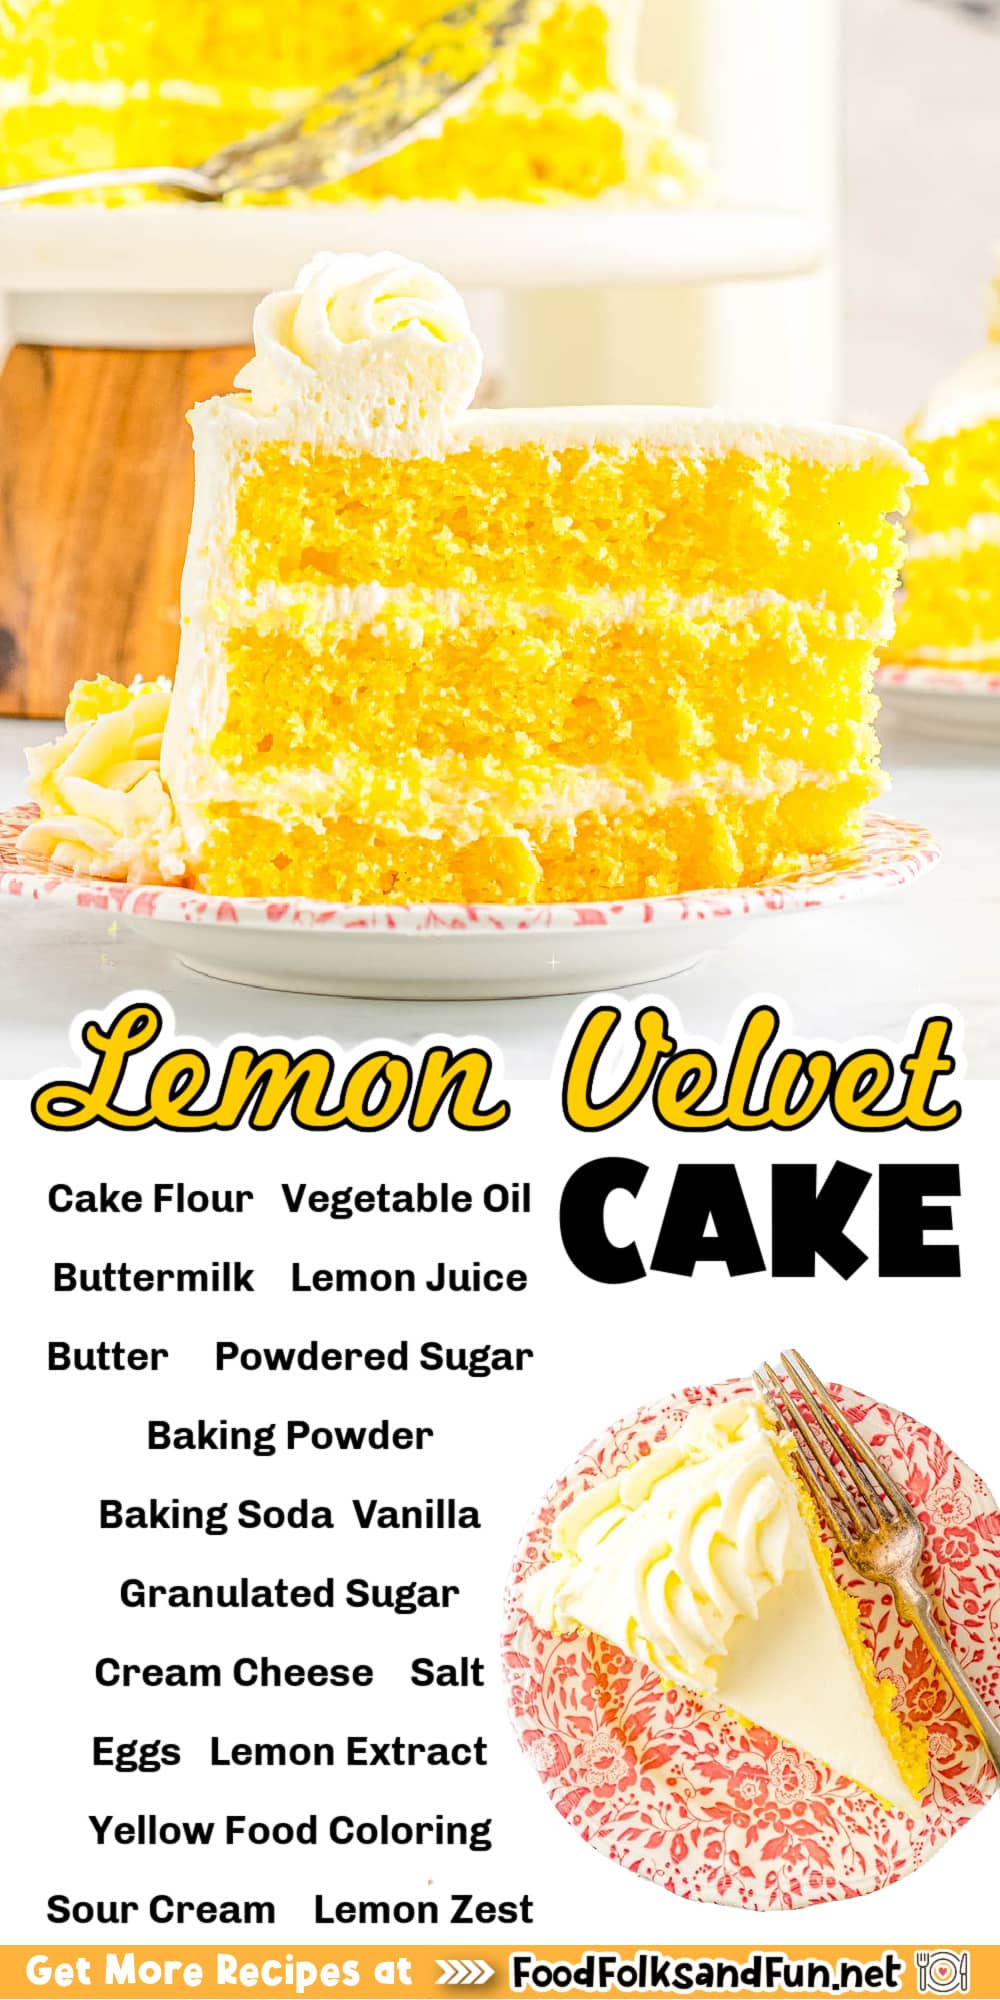 Lemon Velvet Cake has moist, bouncy, soft layers of lemon cake bursting with zesty flavor. It's frosted with rich and creamy lemon buttercream. via @foodfolksandfun